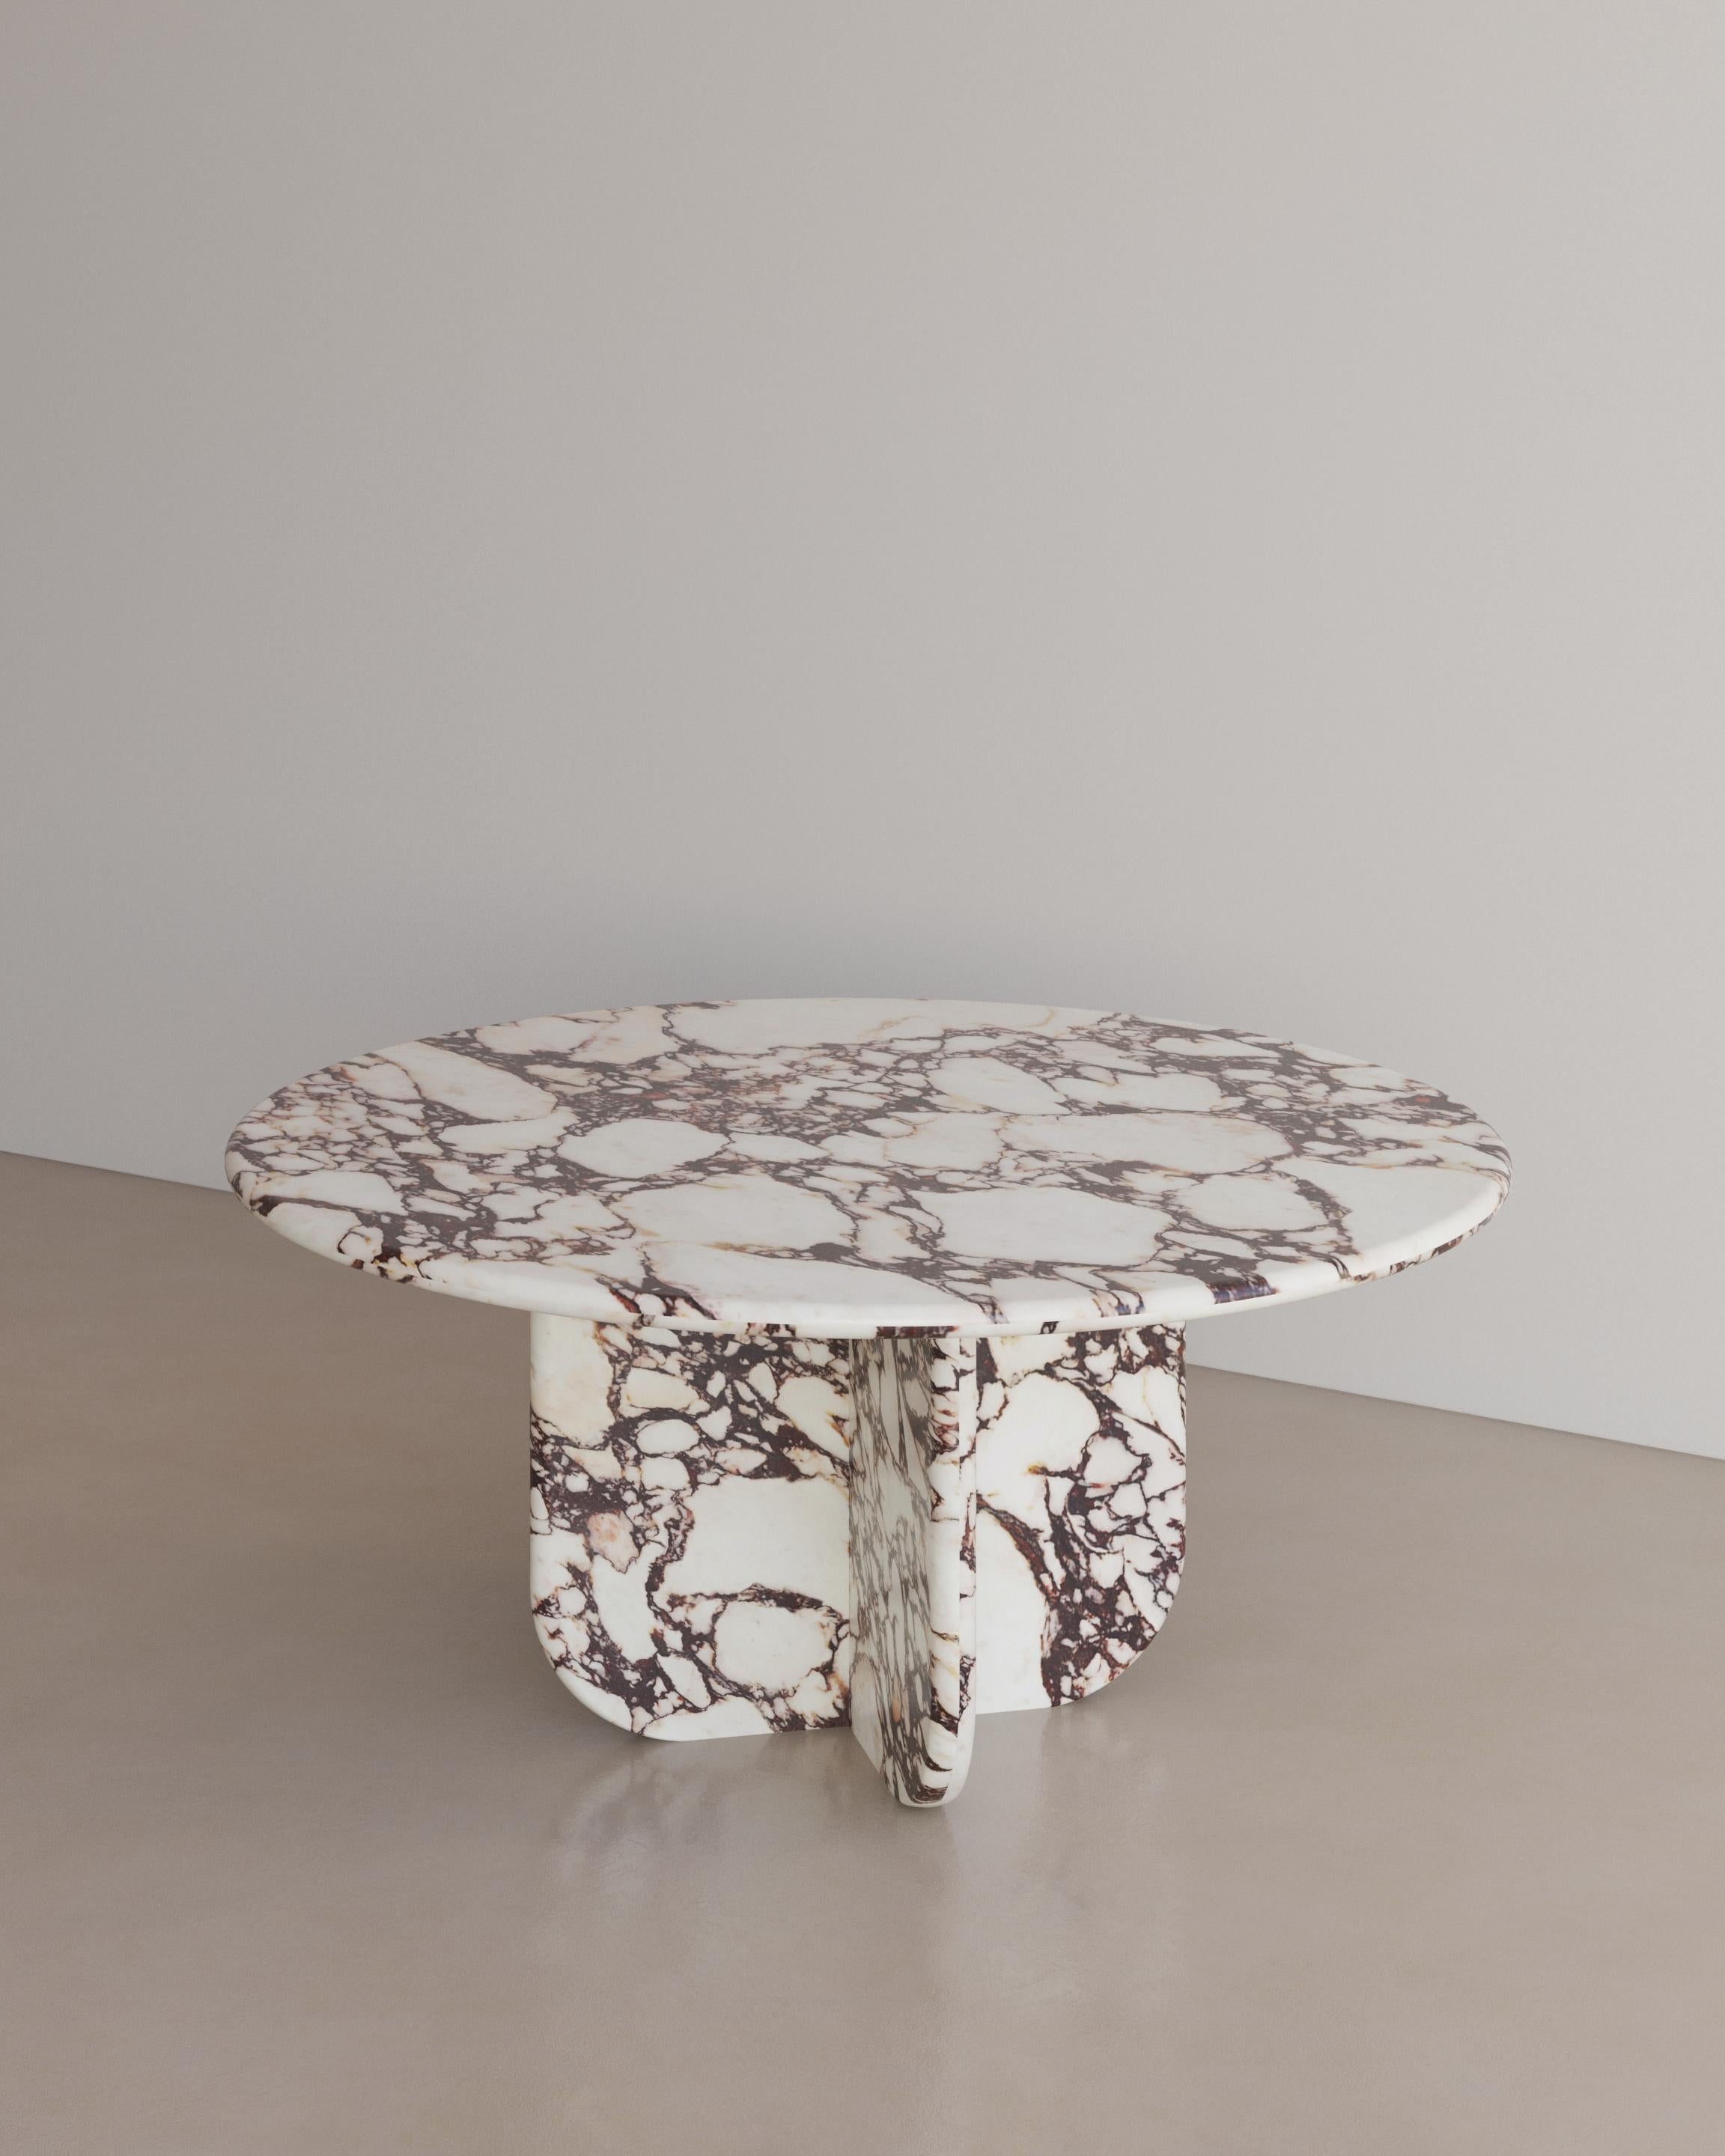 The Essentialist presents the Ètoile Dining Table I in Calacatta Viola Marble. A bold rounded circle effortlessly stacks upon a four point star. Smooth planes exonerate beautiful natural patterning, forging a statement of minimalism that embodies